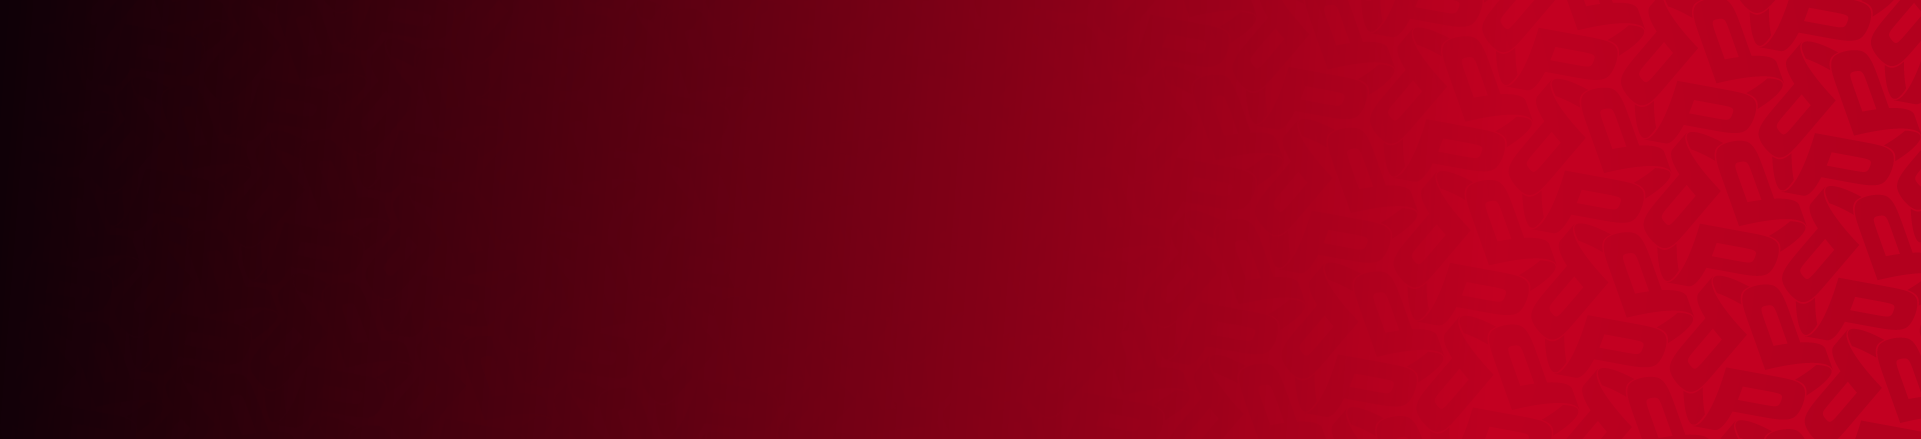 PPP_BackgroundPattern_Red-1